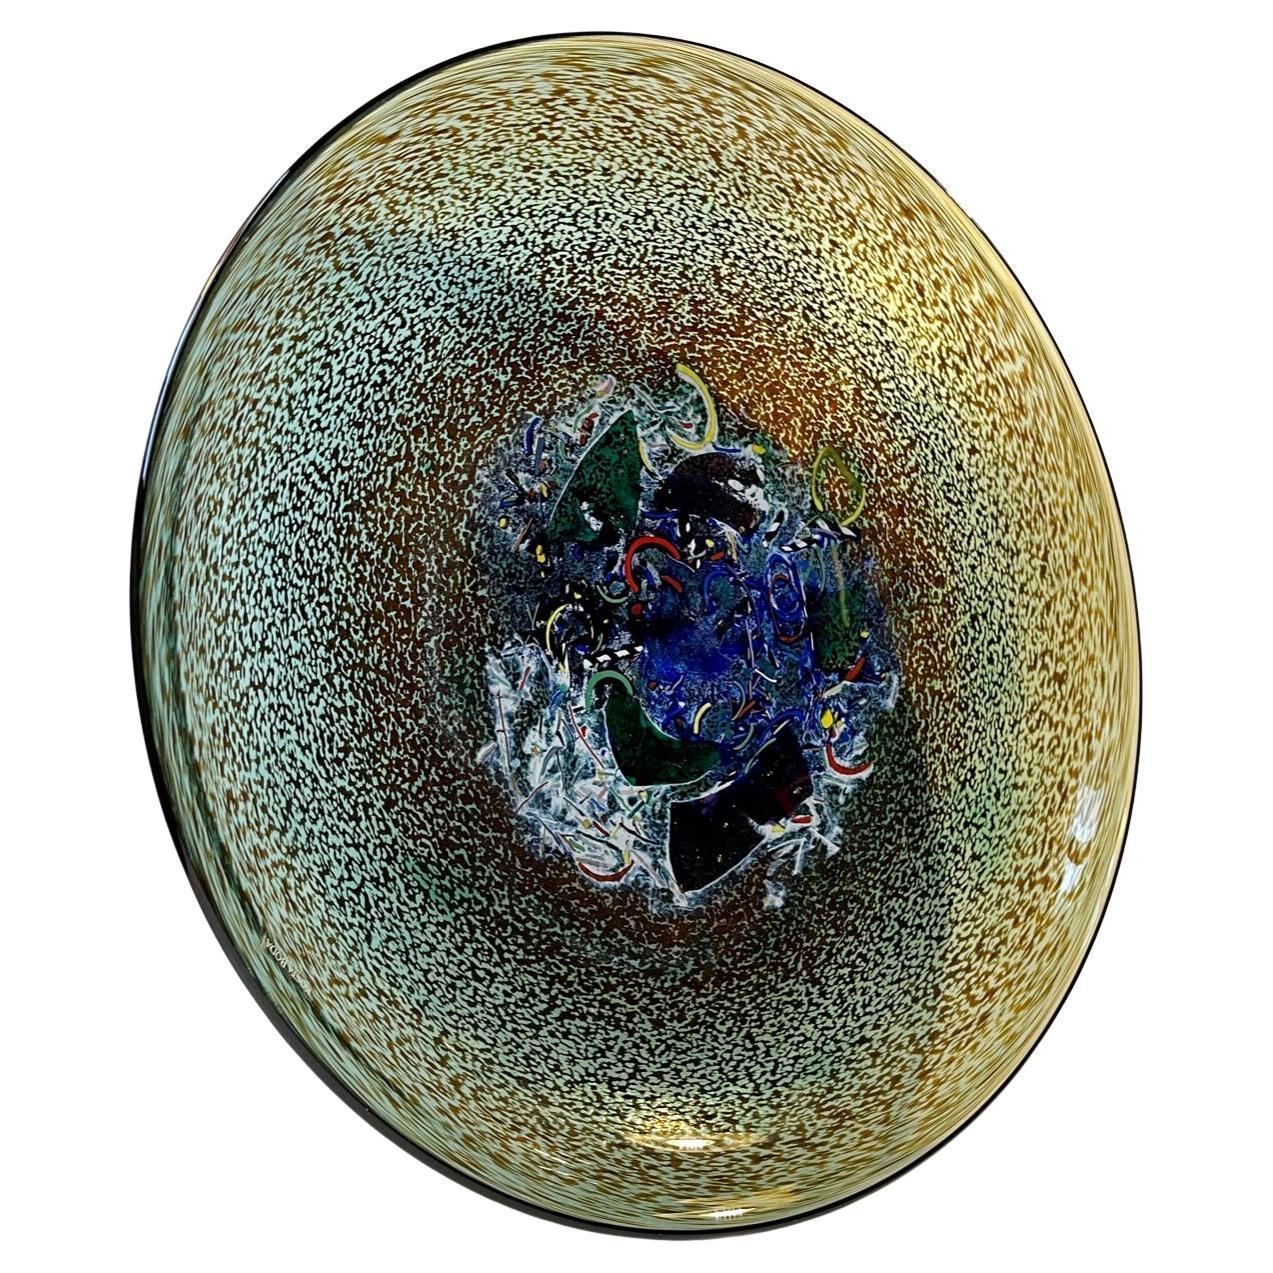 A spectacular hand-signed artist collection dish or bowl by the Swedish glass designer Bertil Vallien. It is called Meteor for obvious reasons and is executed in a rainbow of diffrent colors fusioned together with advanced techniques. This example